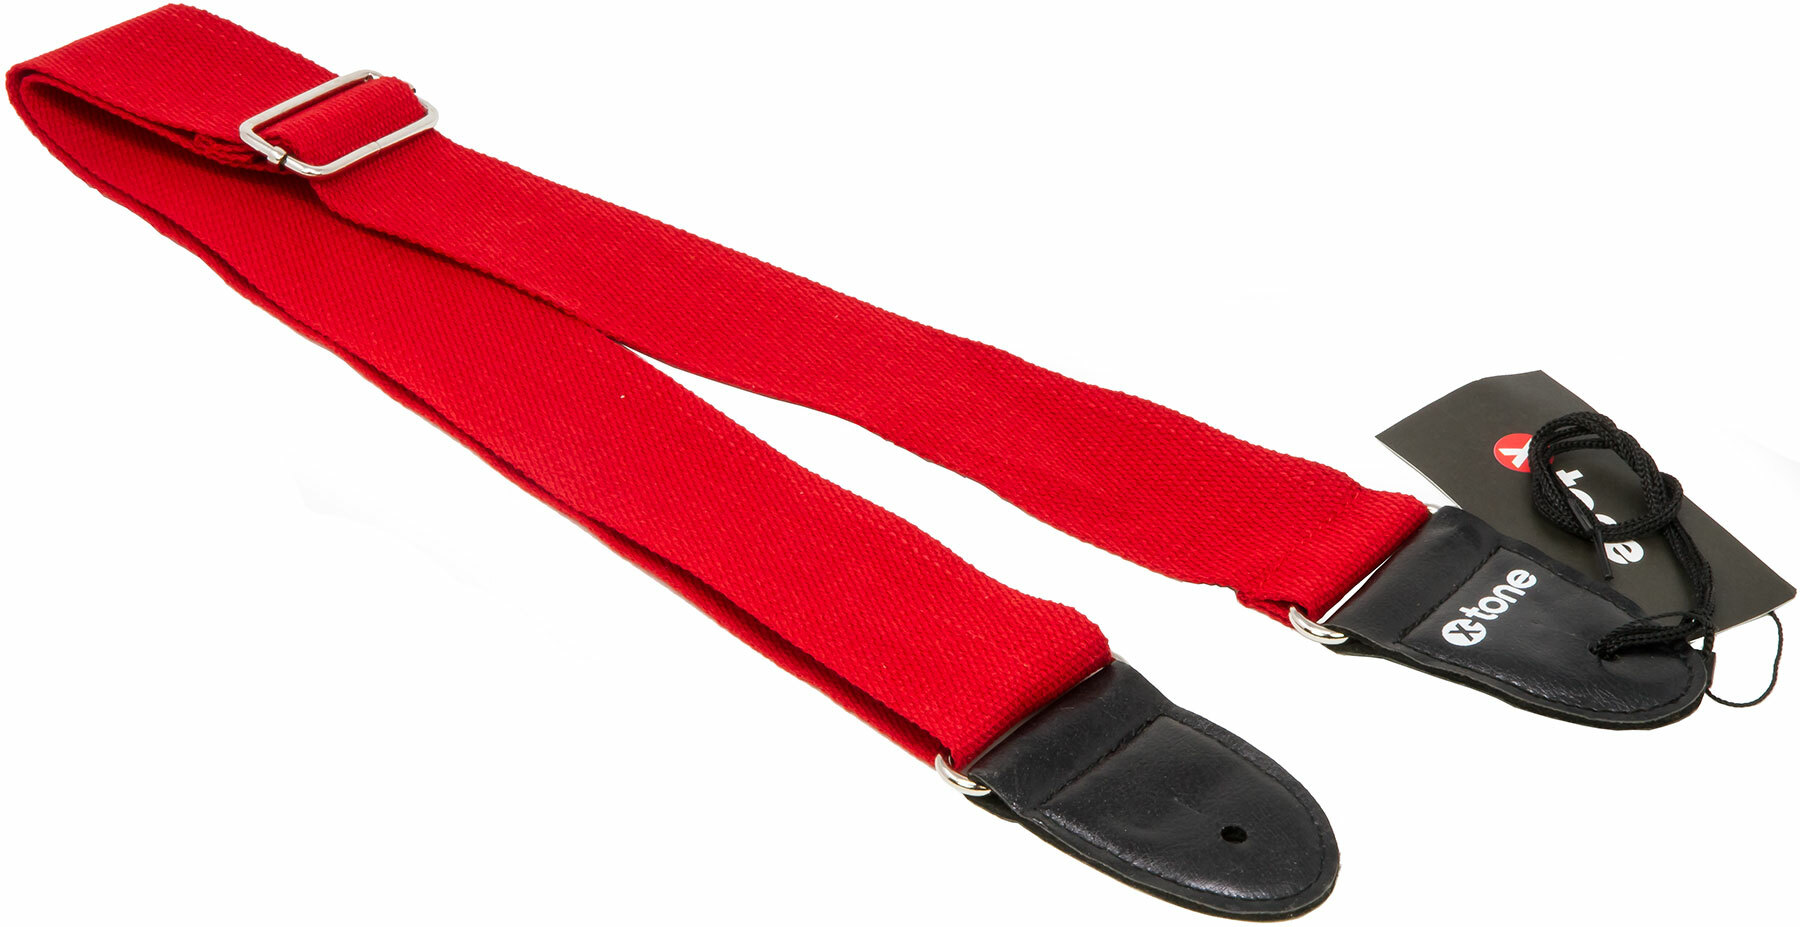 X-tone Xg 3111 Cotton Metal Buckle Guitar Strap Red - Sangle Courroie - Main picture